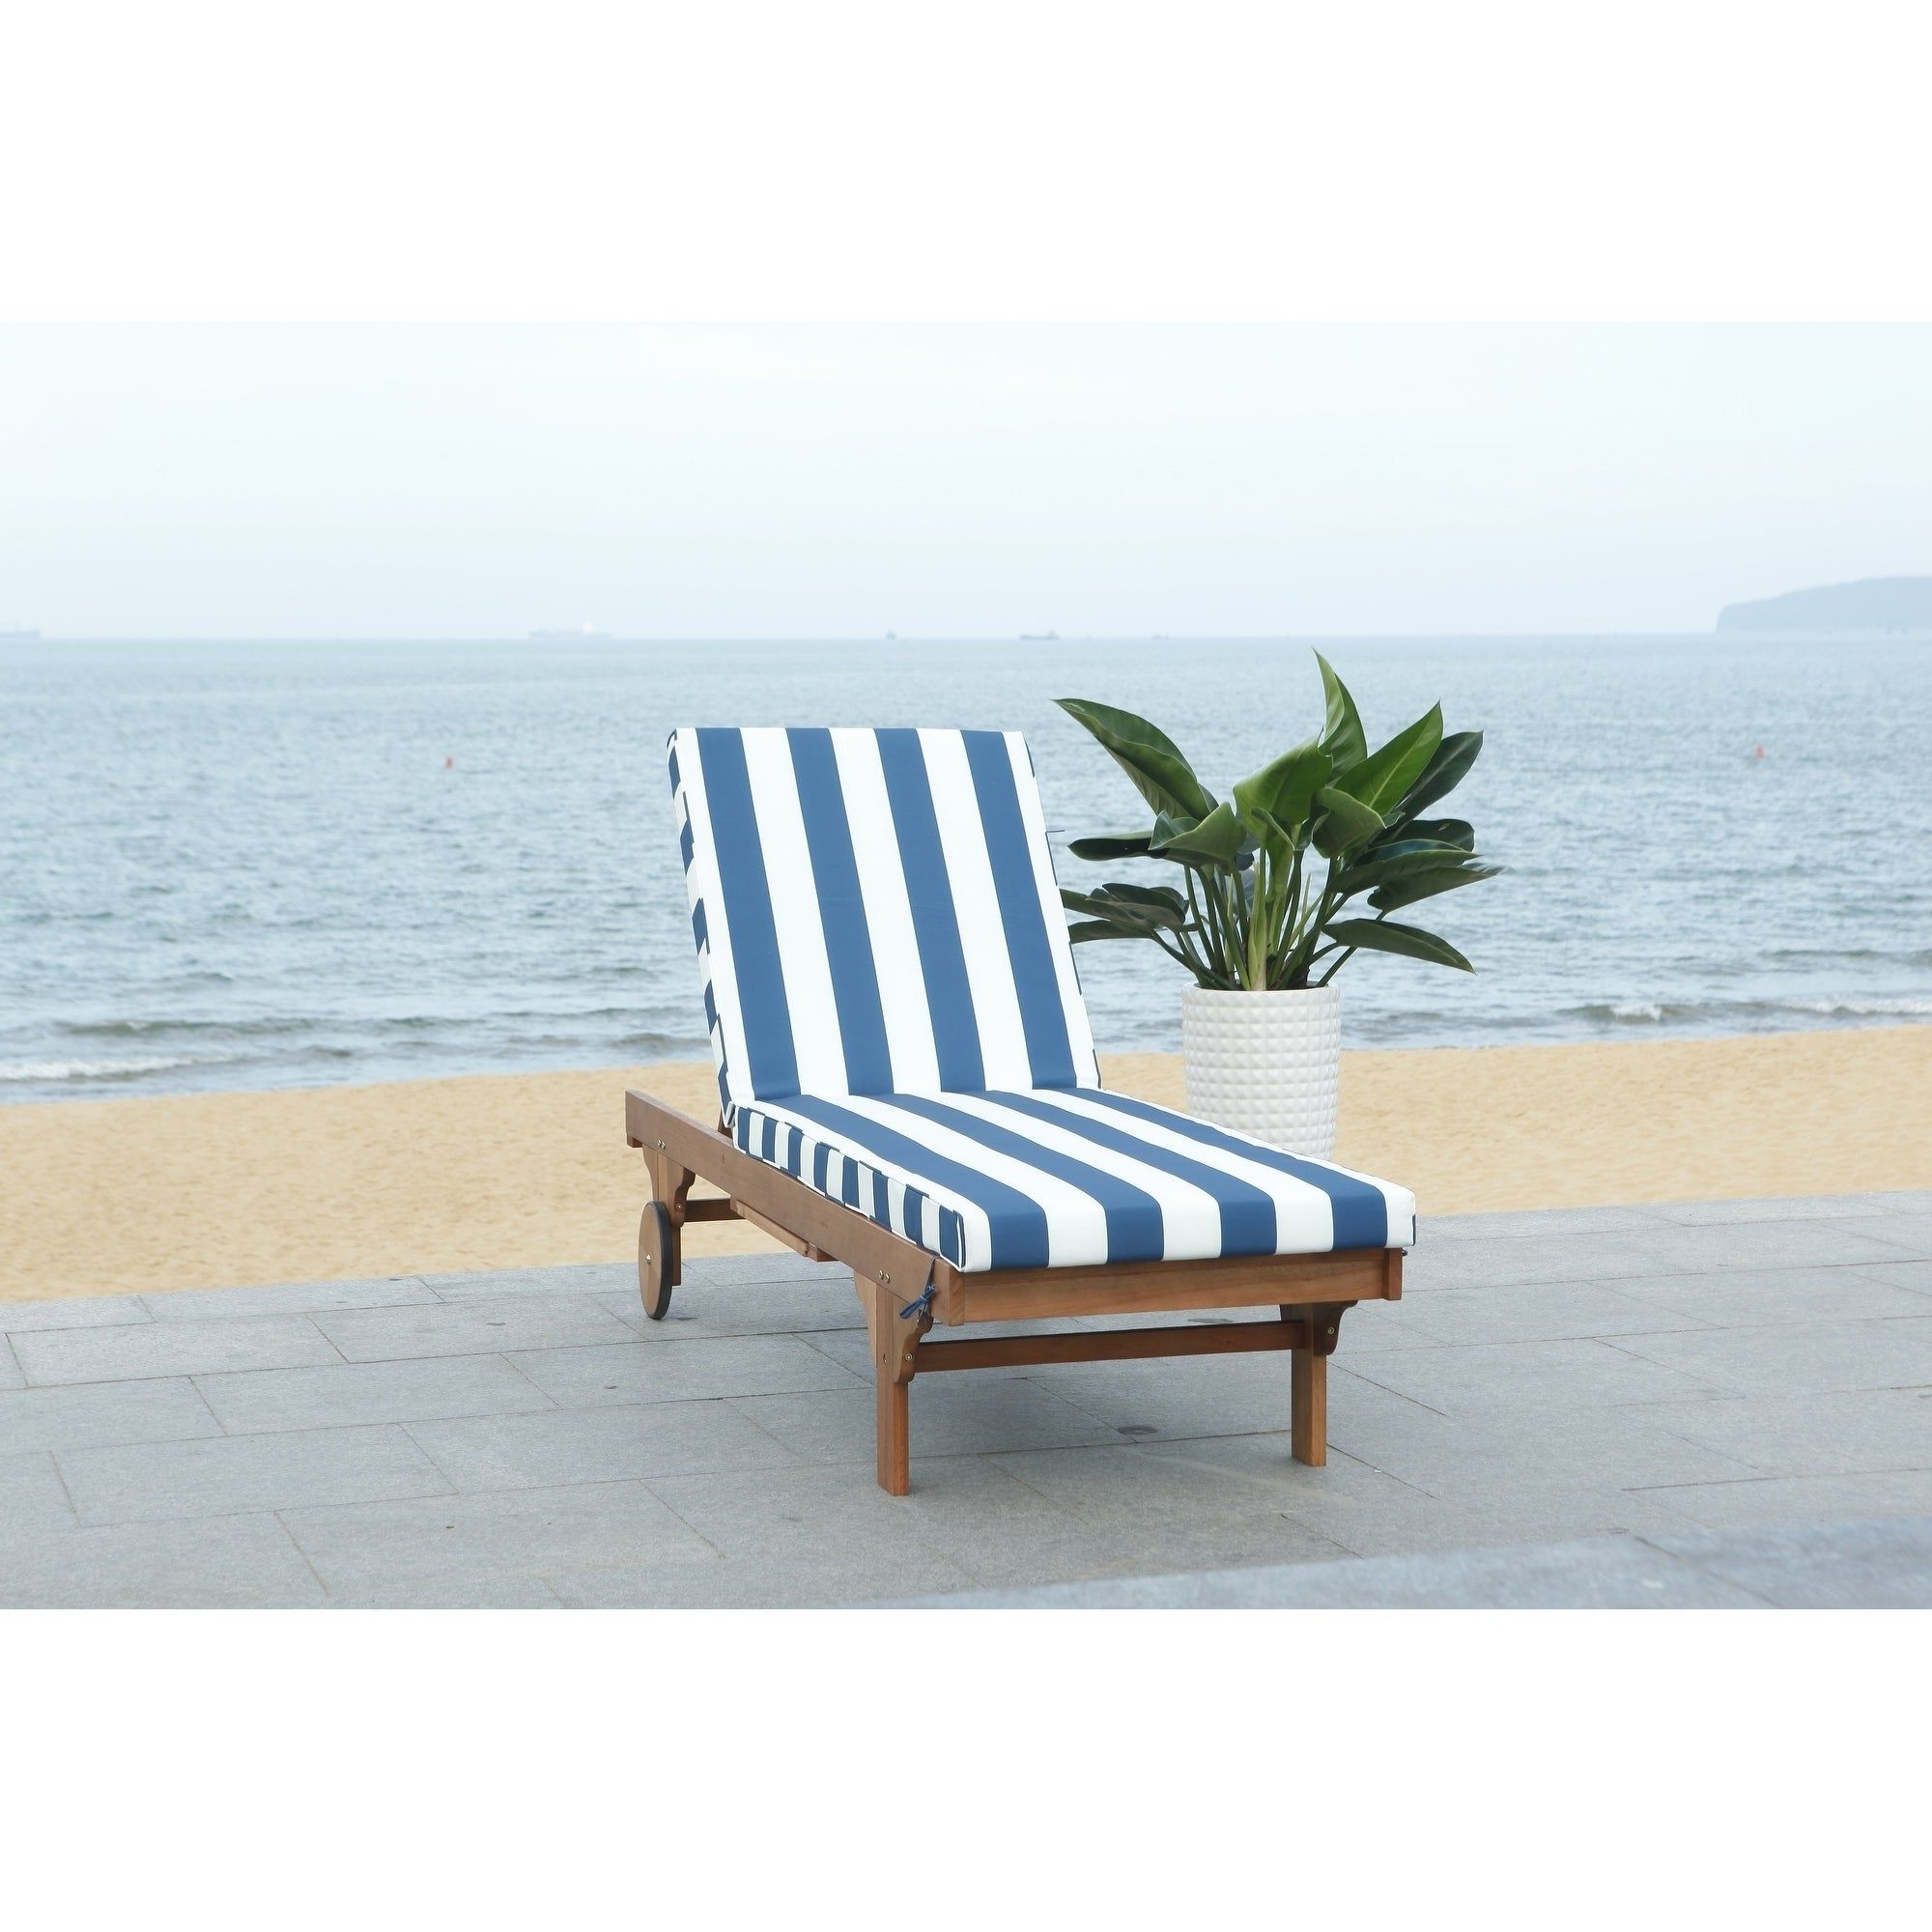 Cart Wheel Adjustable Chaise Lounge Chairs Throughout Current Safavieh Outdoor Living Newport Navy/ White Stripe Cart Wheel Adjustable  Chaise Lounge Chair – 27.6" X 78.7" X  (View 8 of 25)